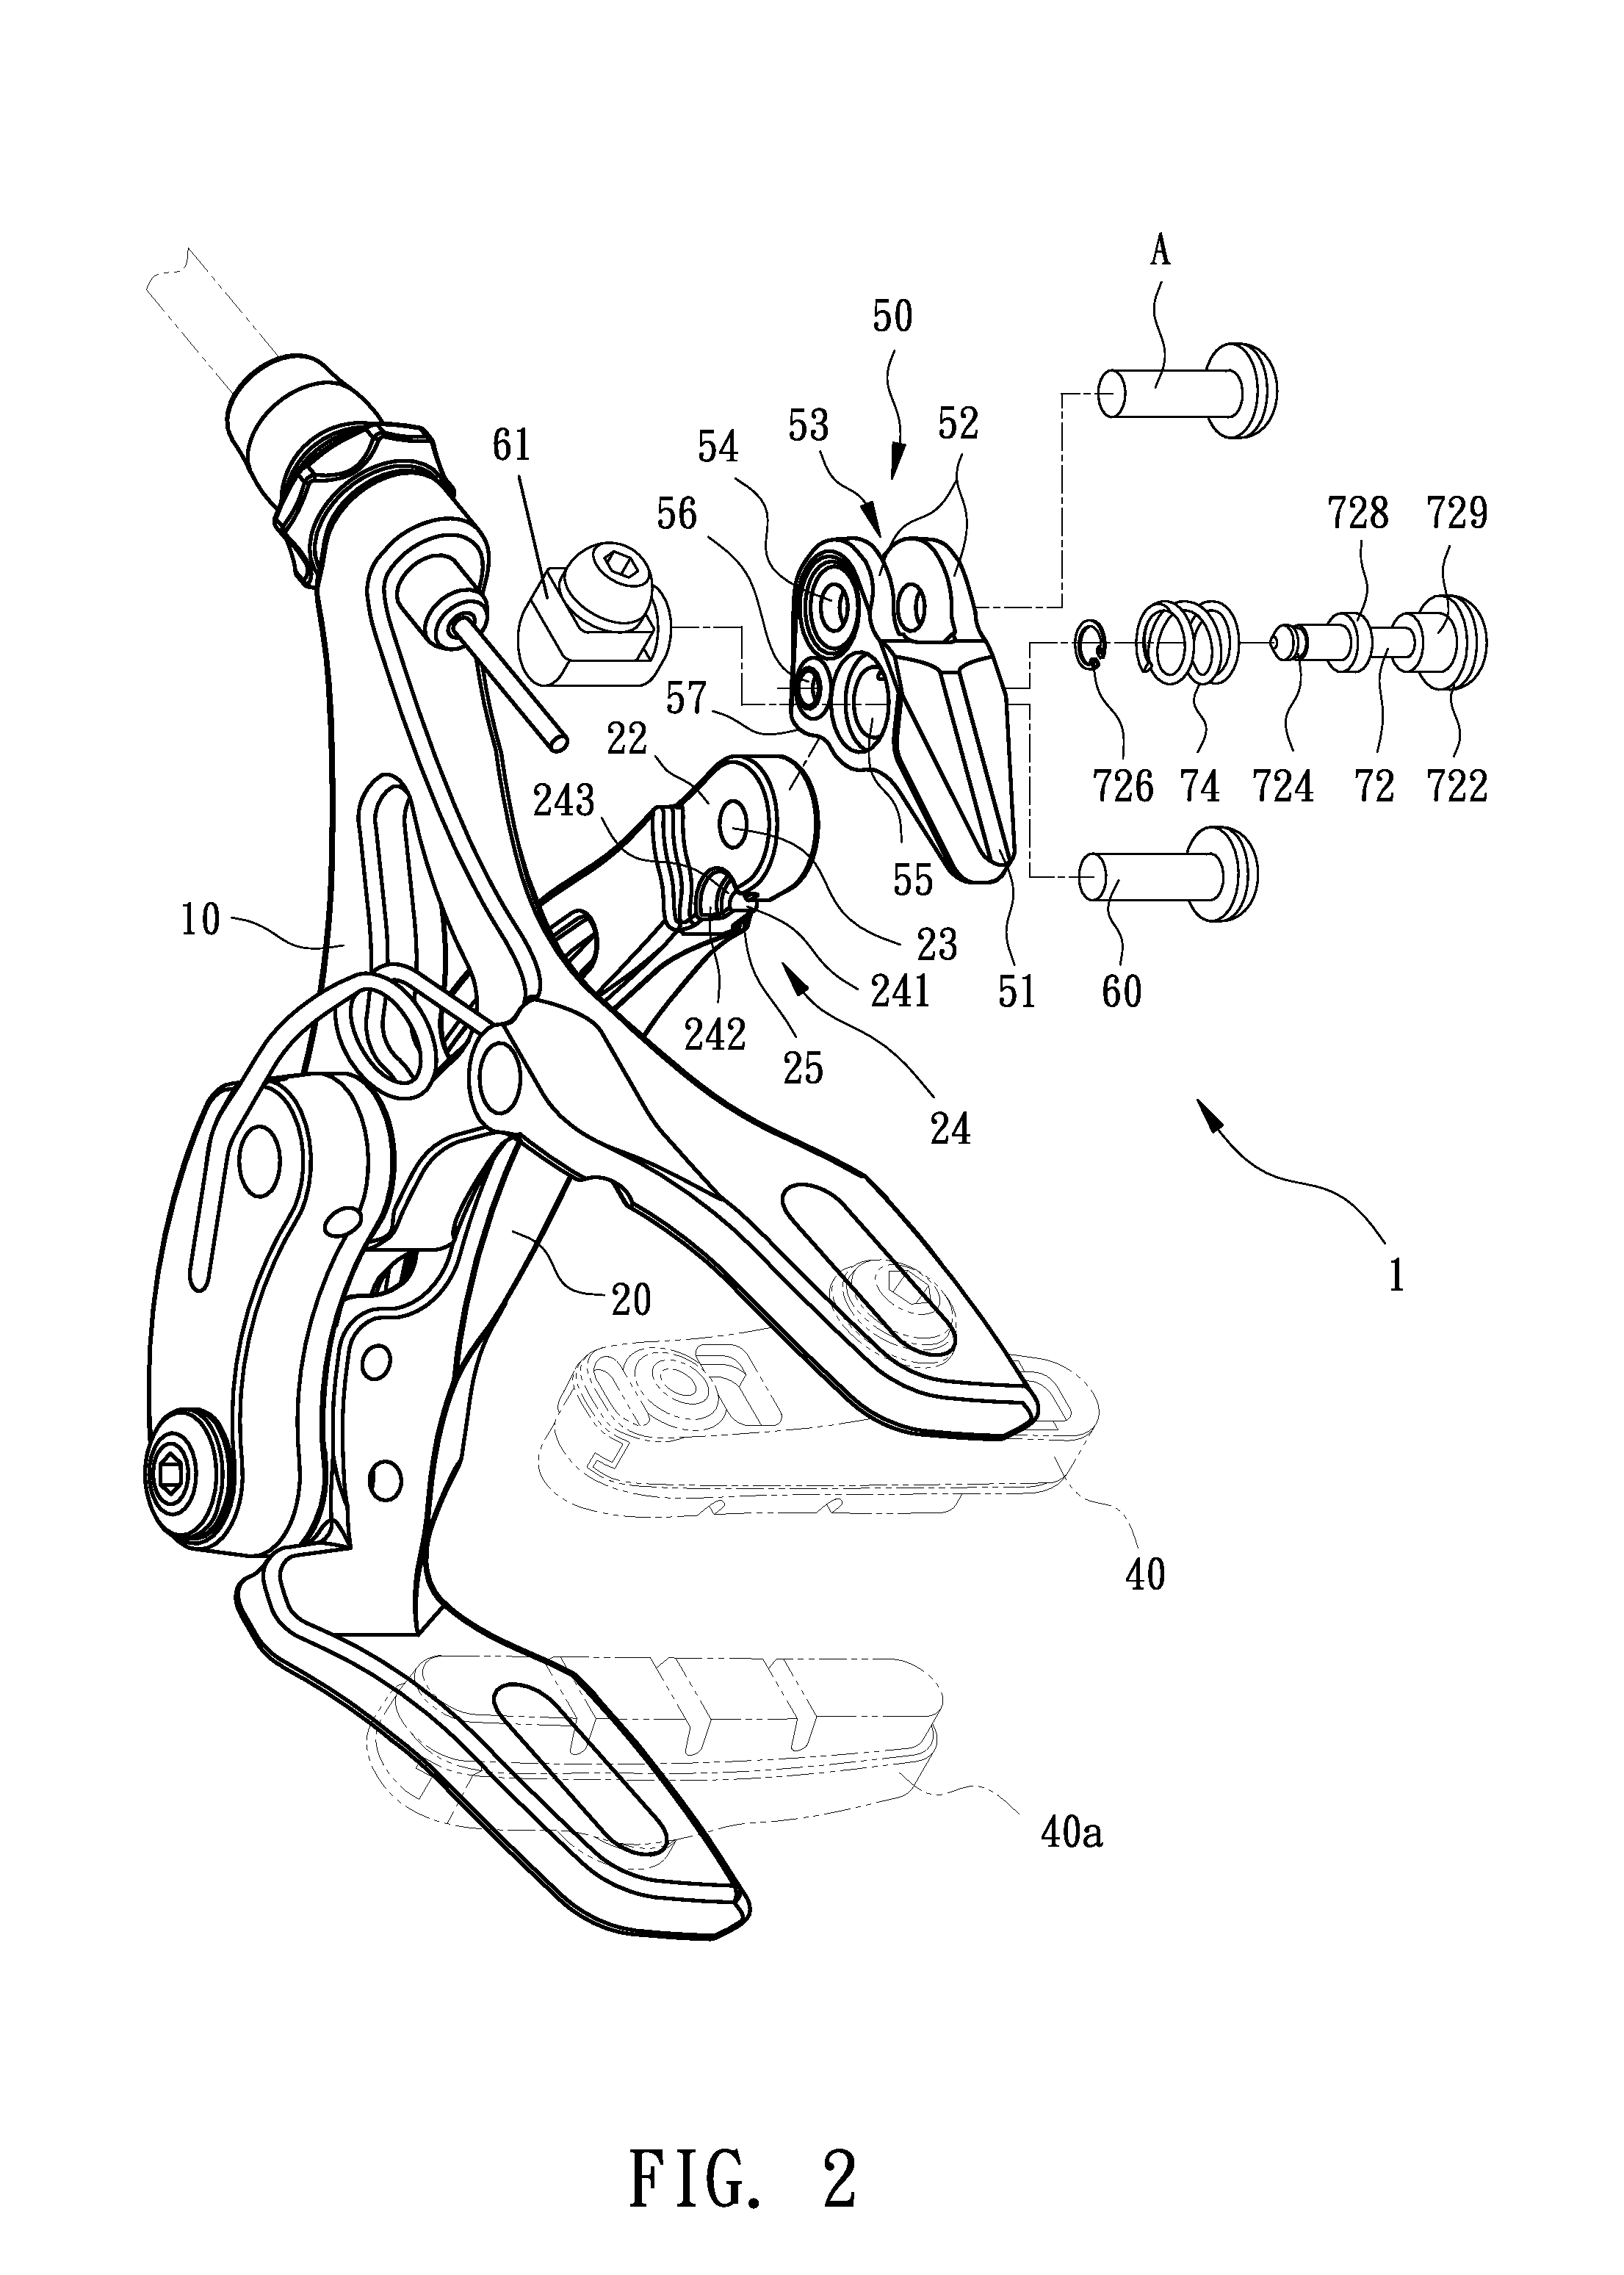 Mechanism for quickly loosening and tightening brake cable in caliper brake of bicycle